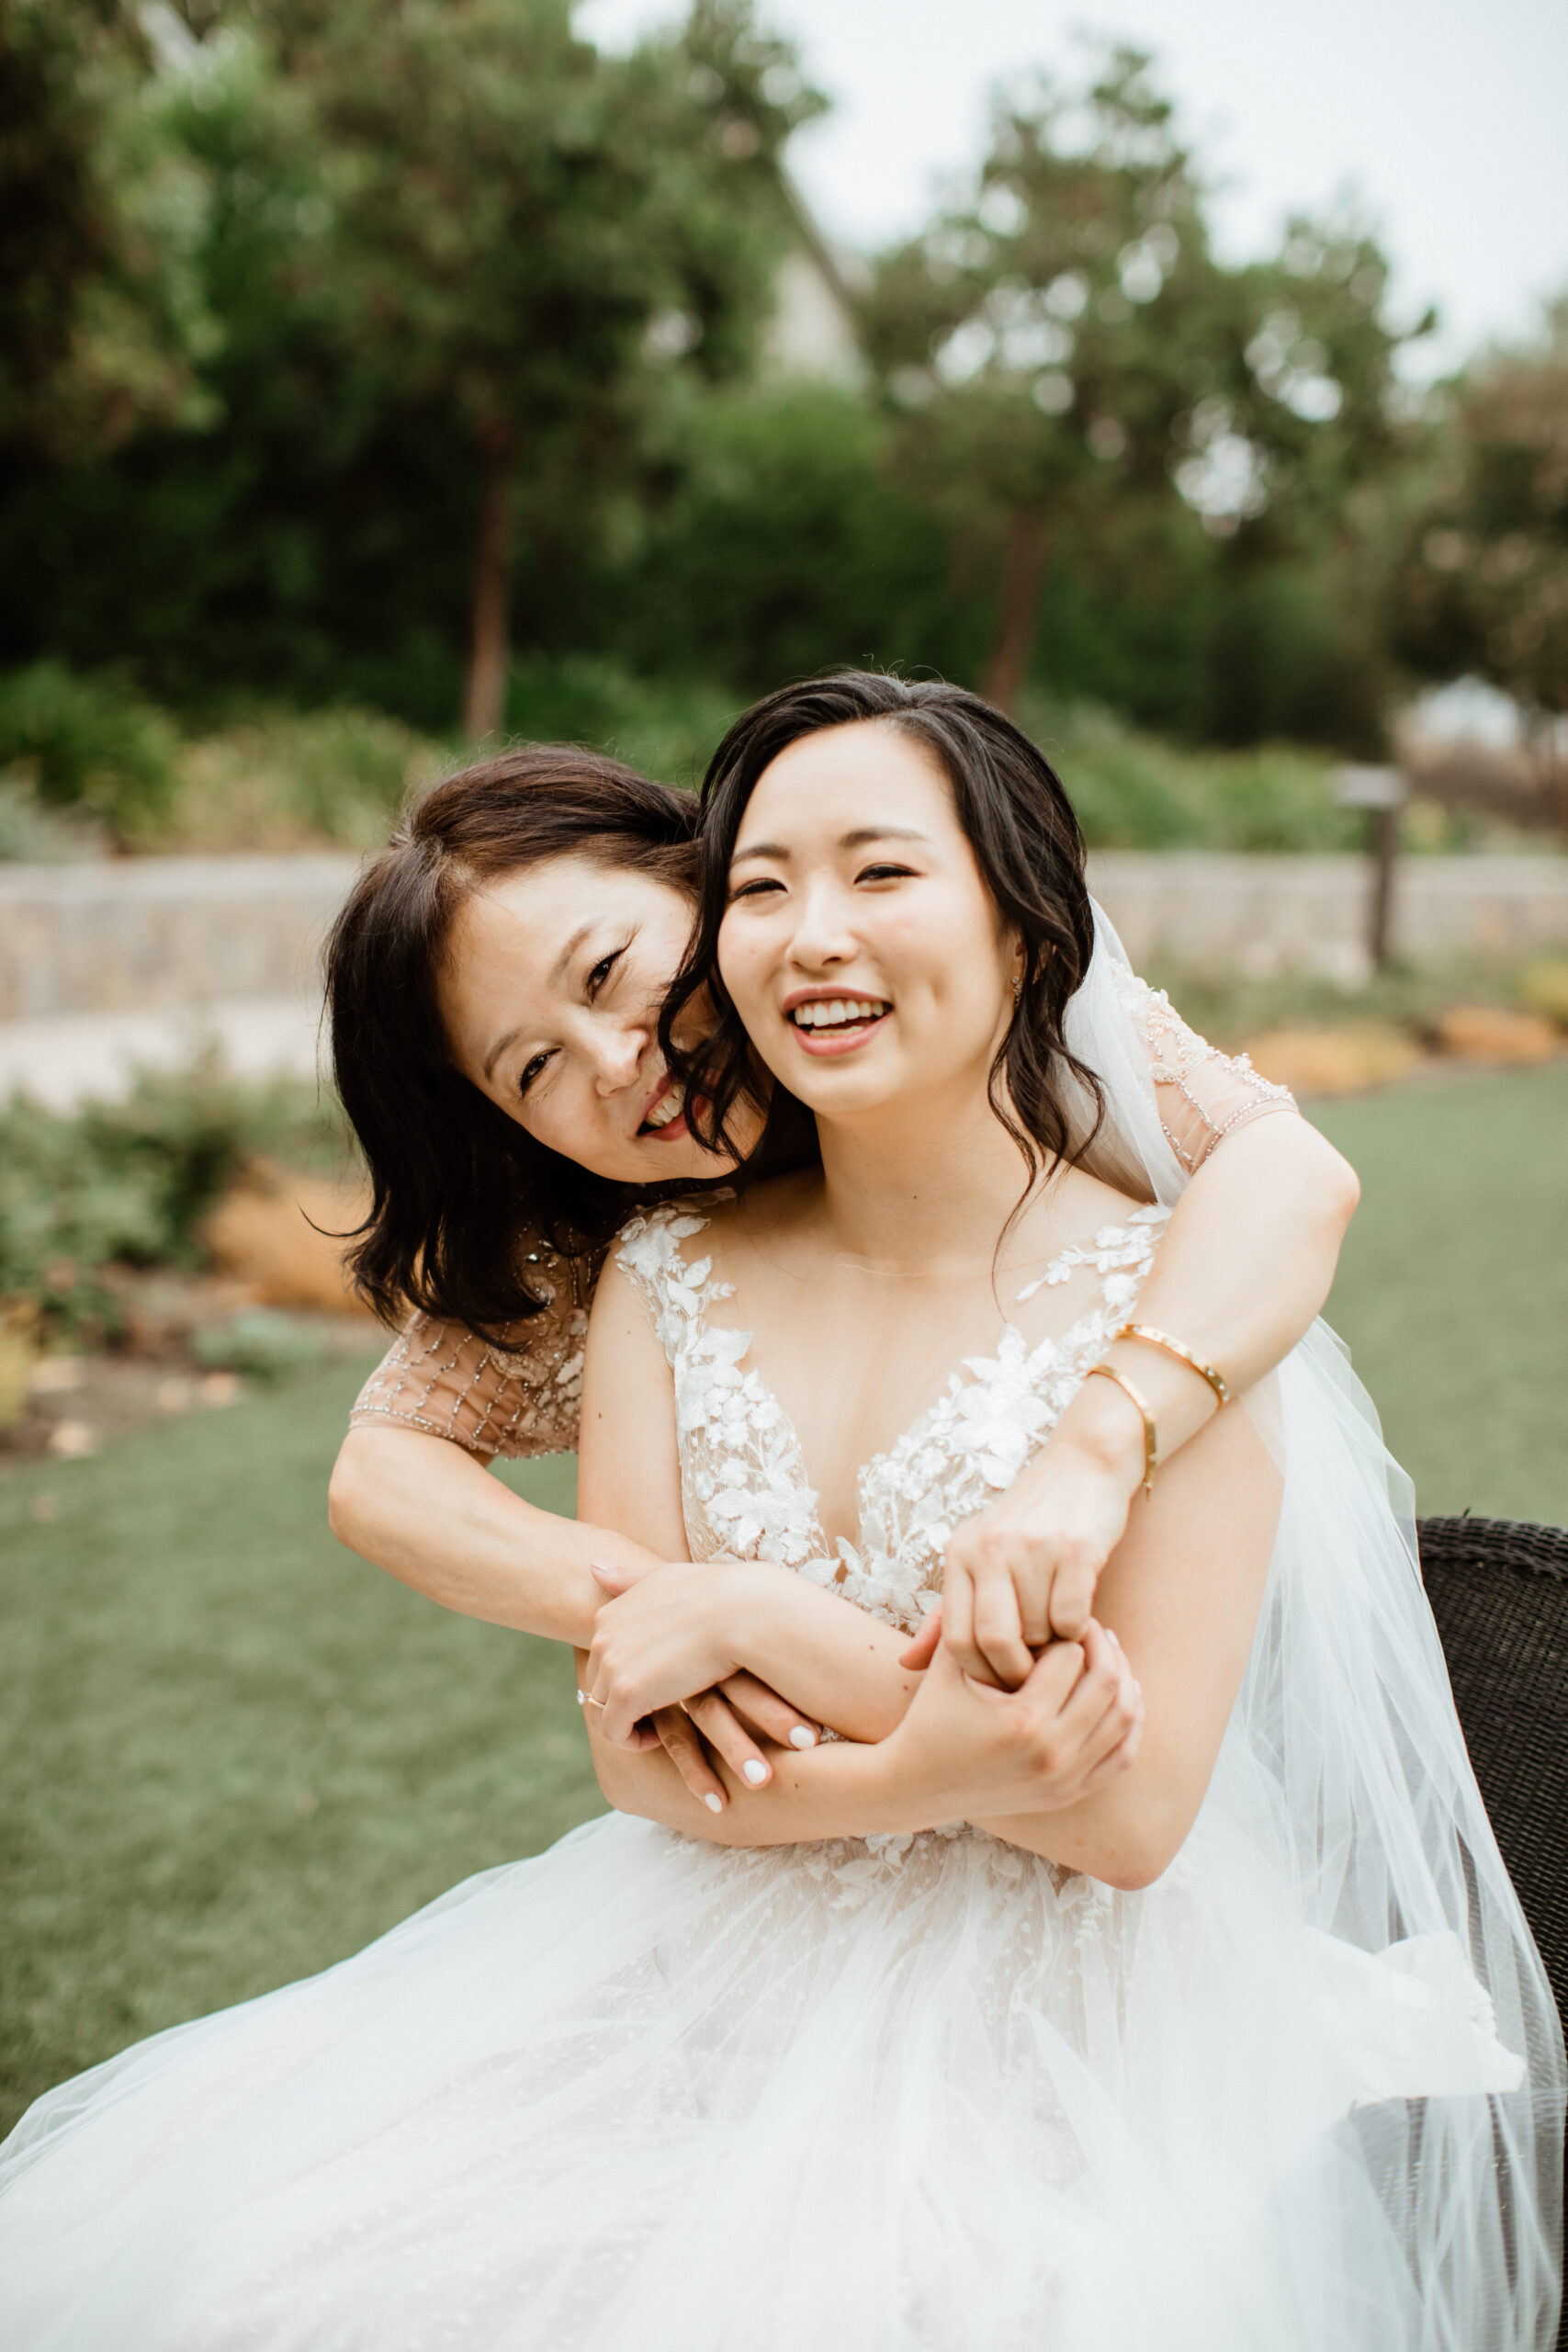 Stunning bride poses with a family member during her wedding day